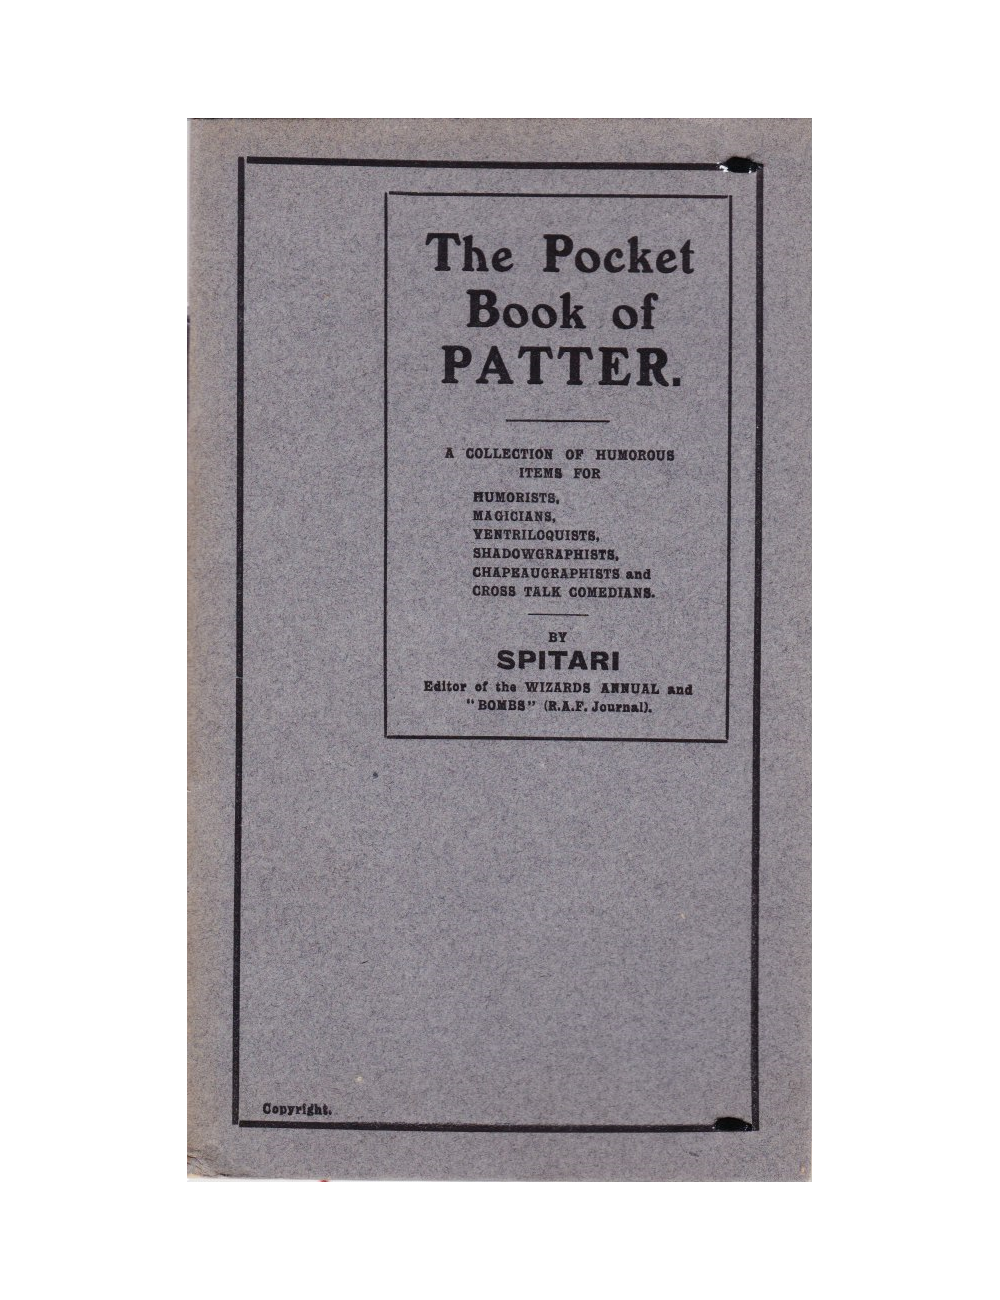 THE POCKET BOOK OF PATTER by SPITARI